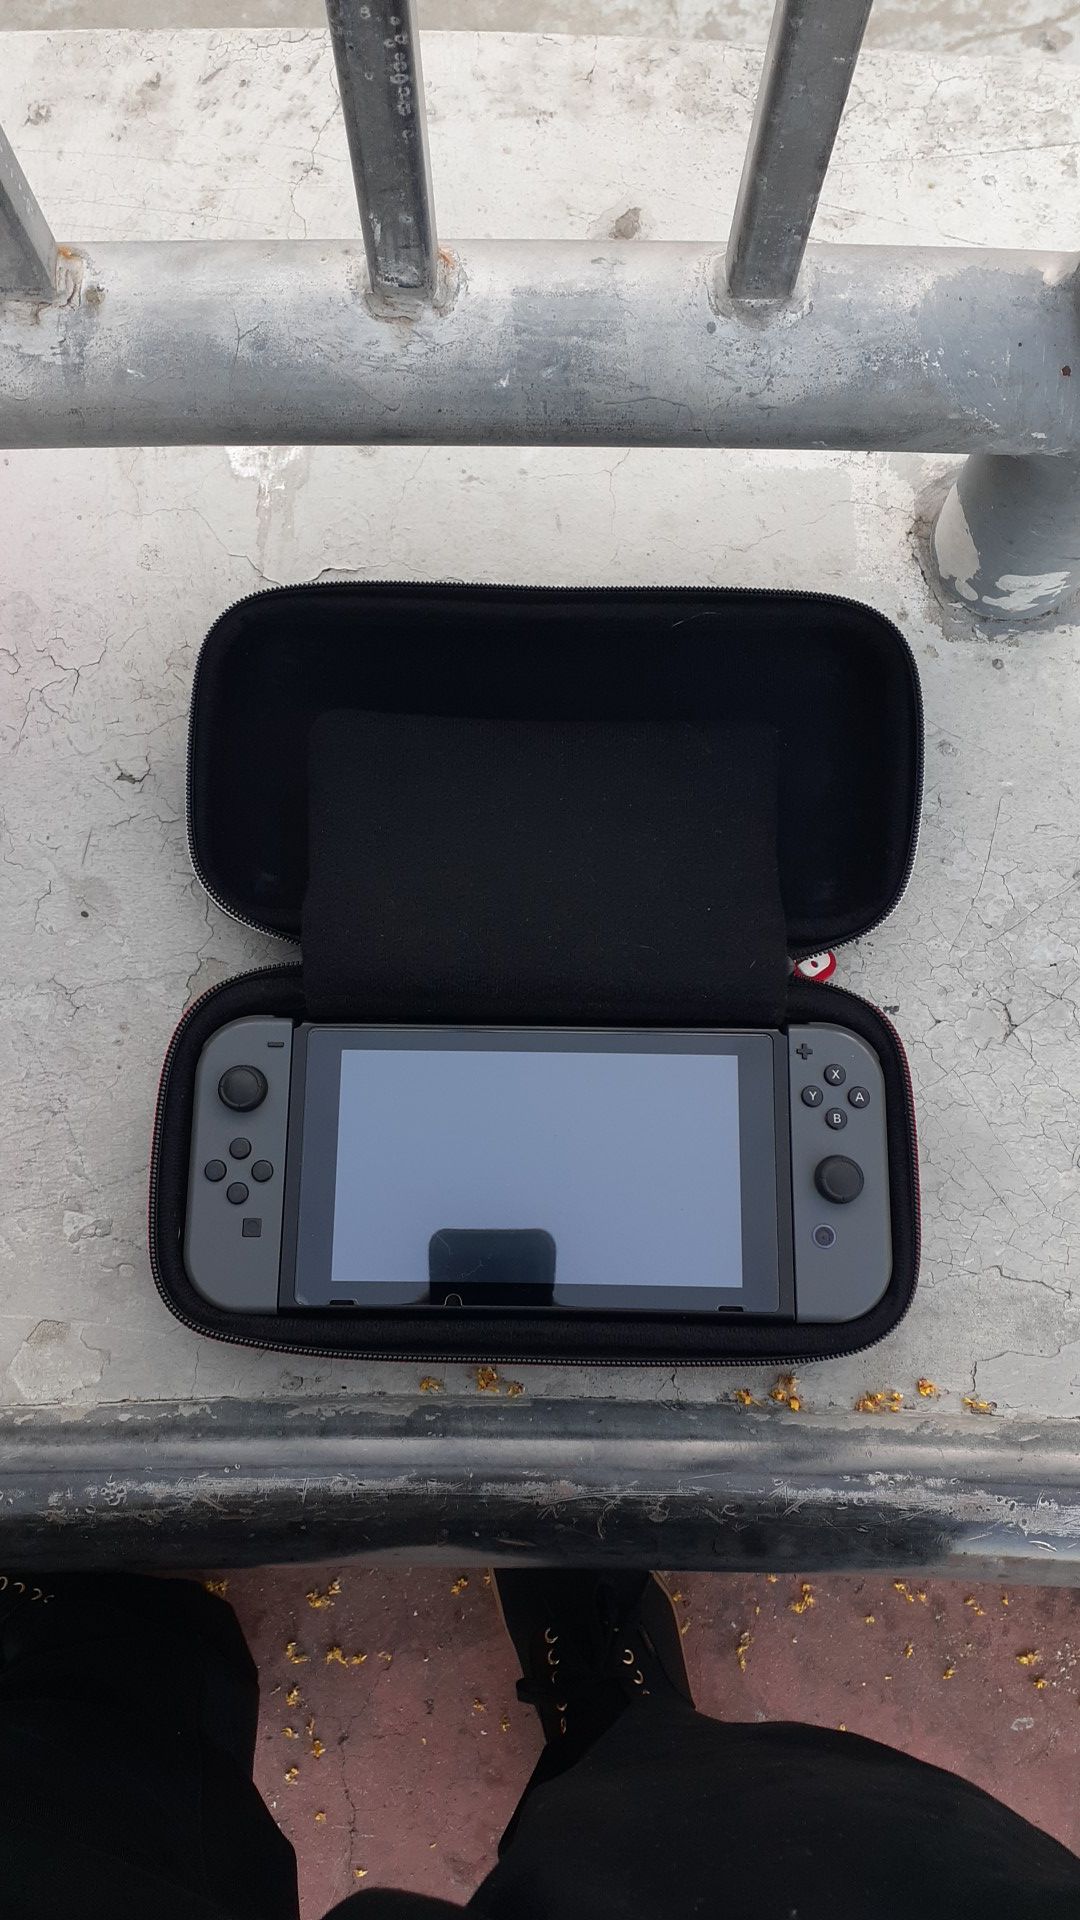 Nintendo Switch and accessories